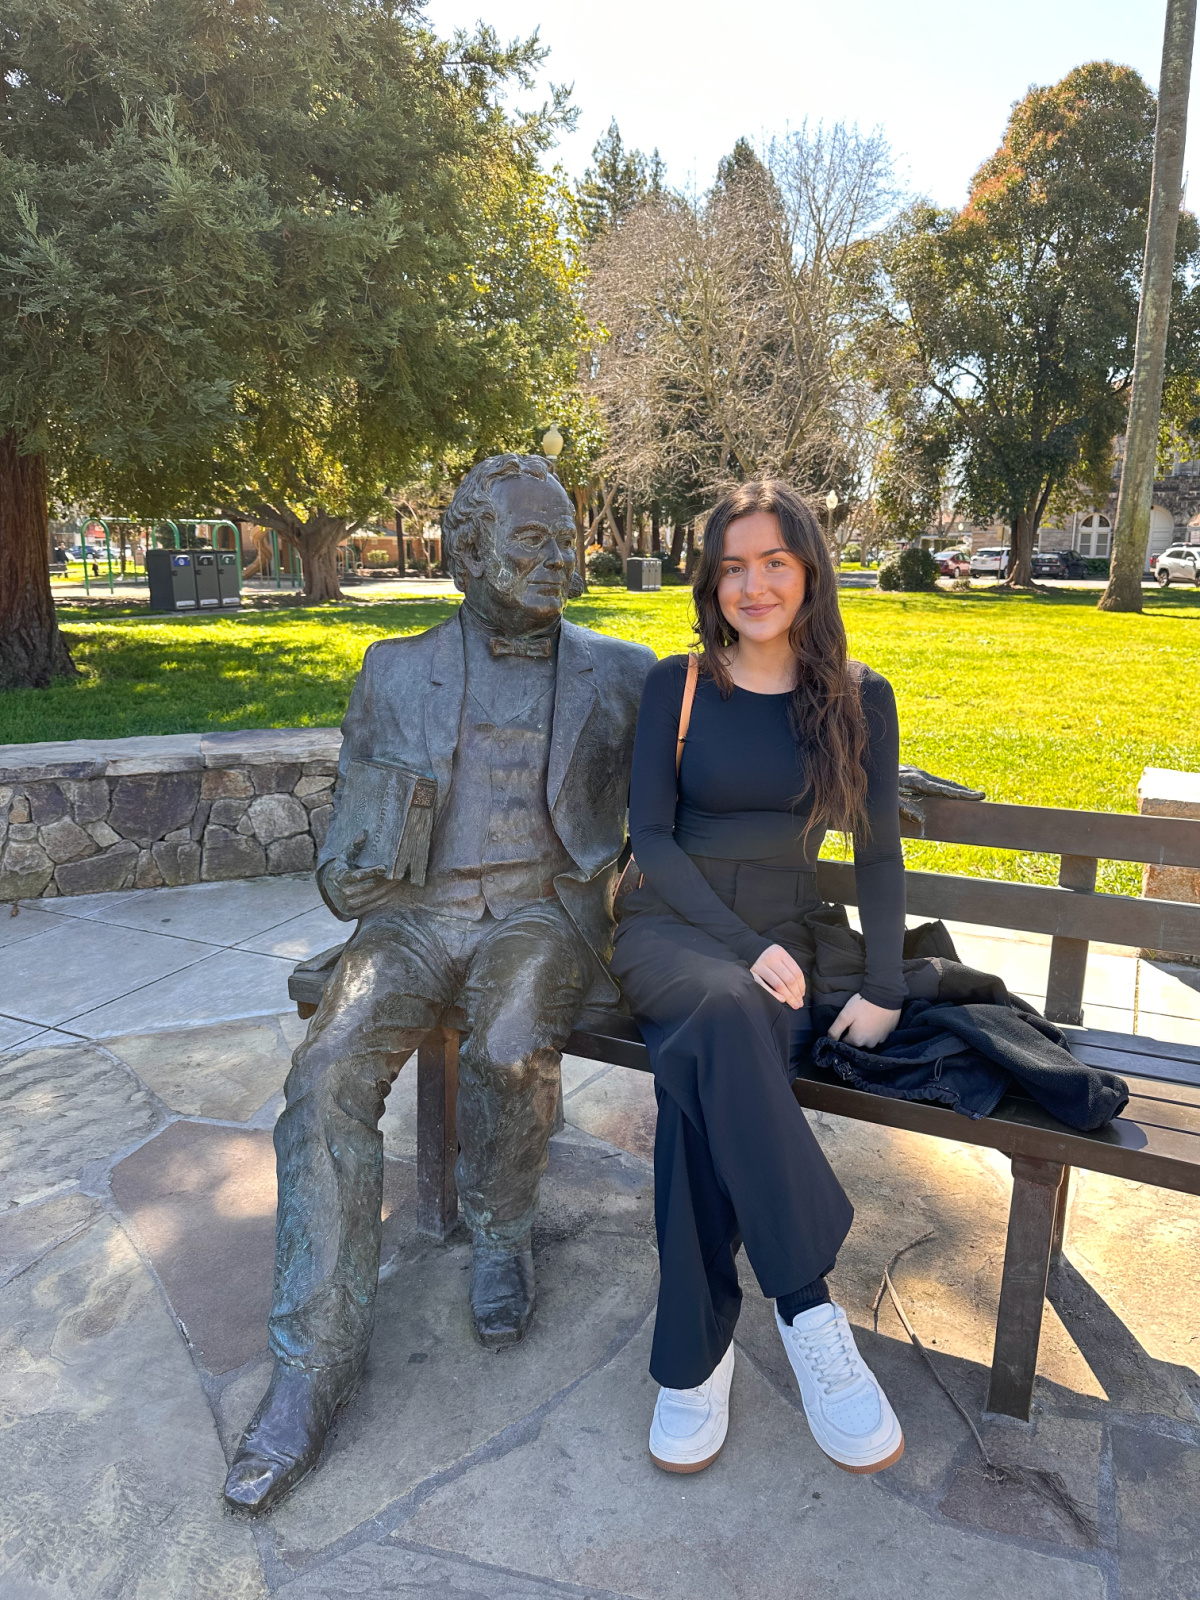 Woman sitting next to statue on bench in Sonoma plaza.